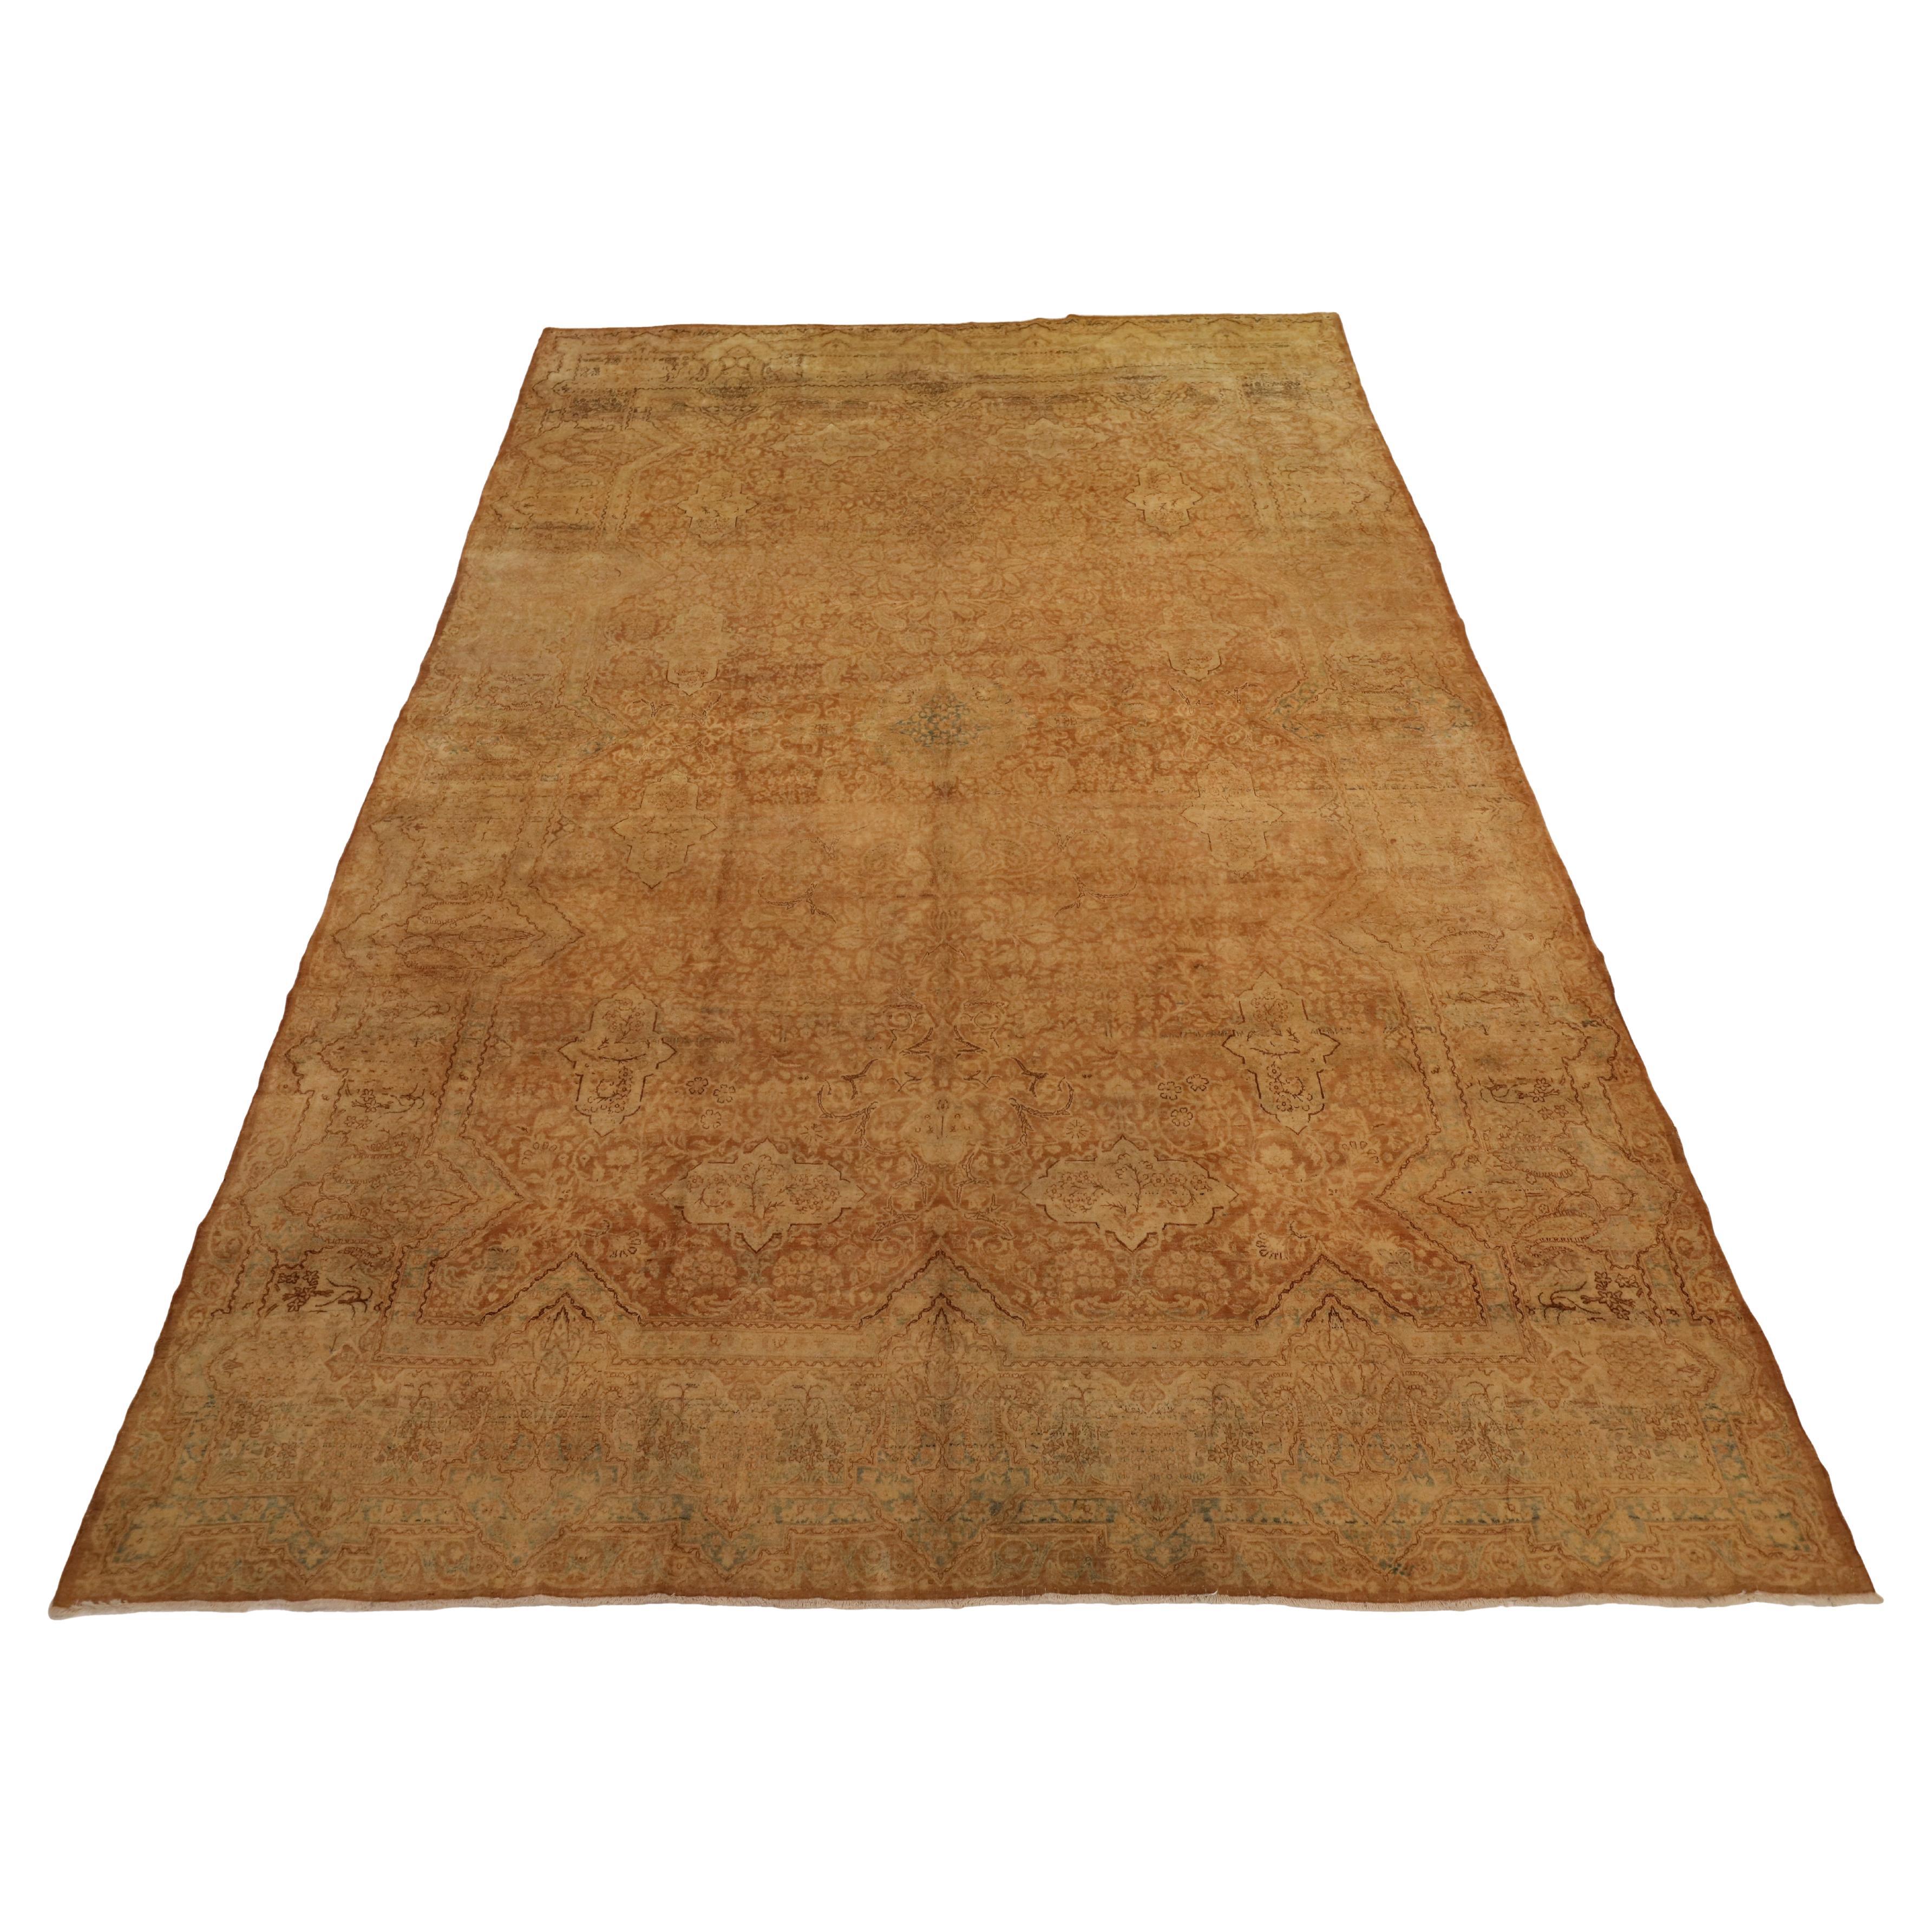 Kerman Antique Faded Room Size Rug, Beige Red - 9 x 15 For Sale